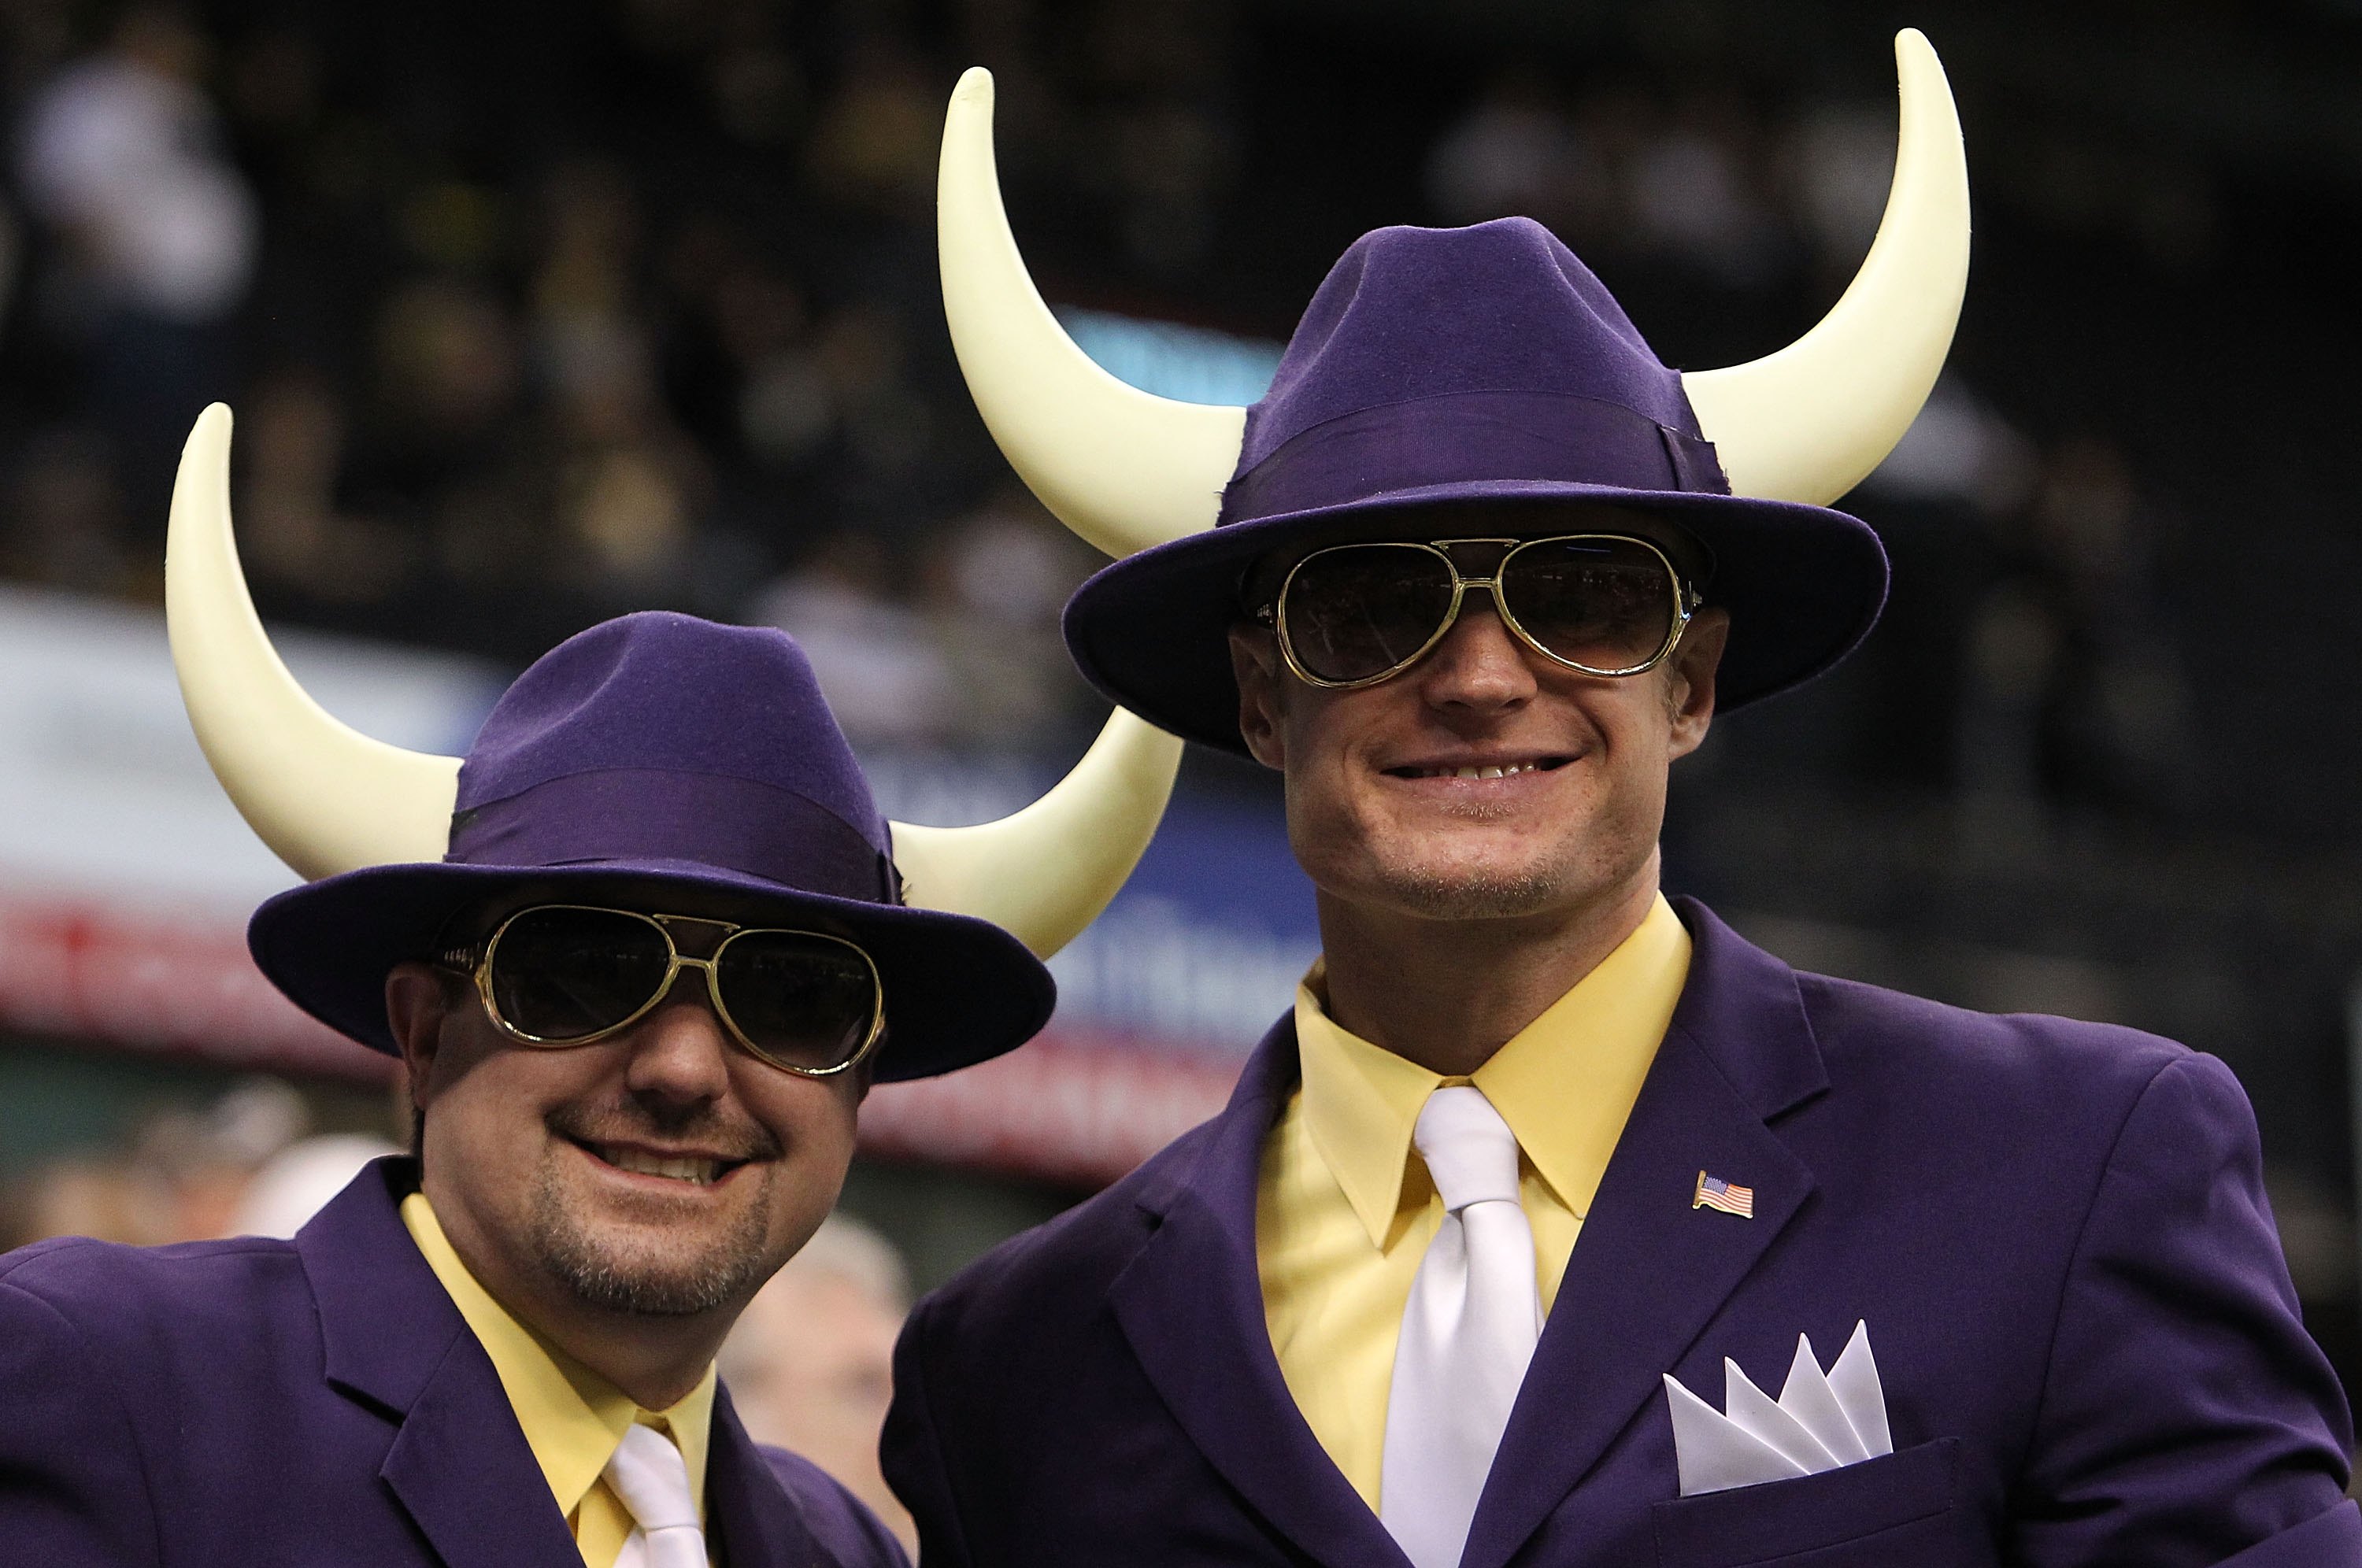 NEW ORLEANS - JANUARY 24:  Fans of the Minnesota Vikings look on from the stands against the New Orleans Saints during the NFC Championship Game at the Louisana Superdome on January 24, 2010 in New Orleans, Louisiana.  (Photo by Ronald Martinez/Getty Imag